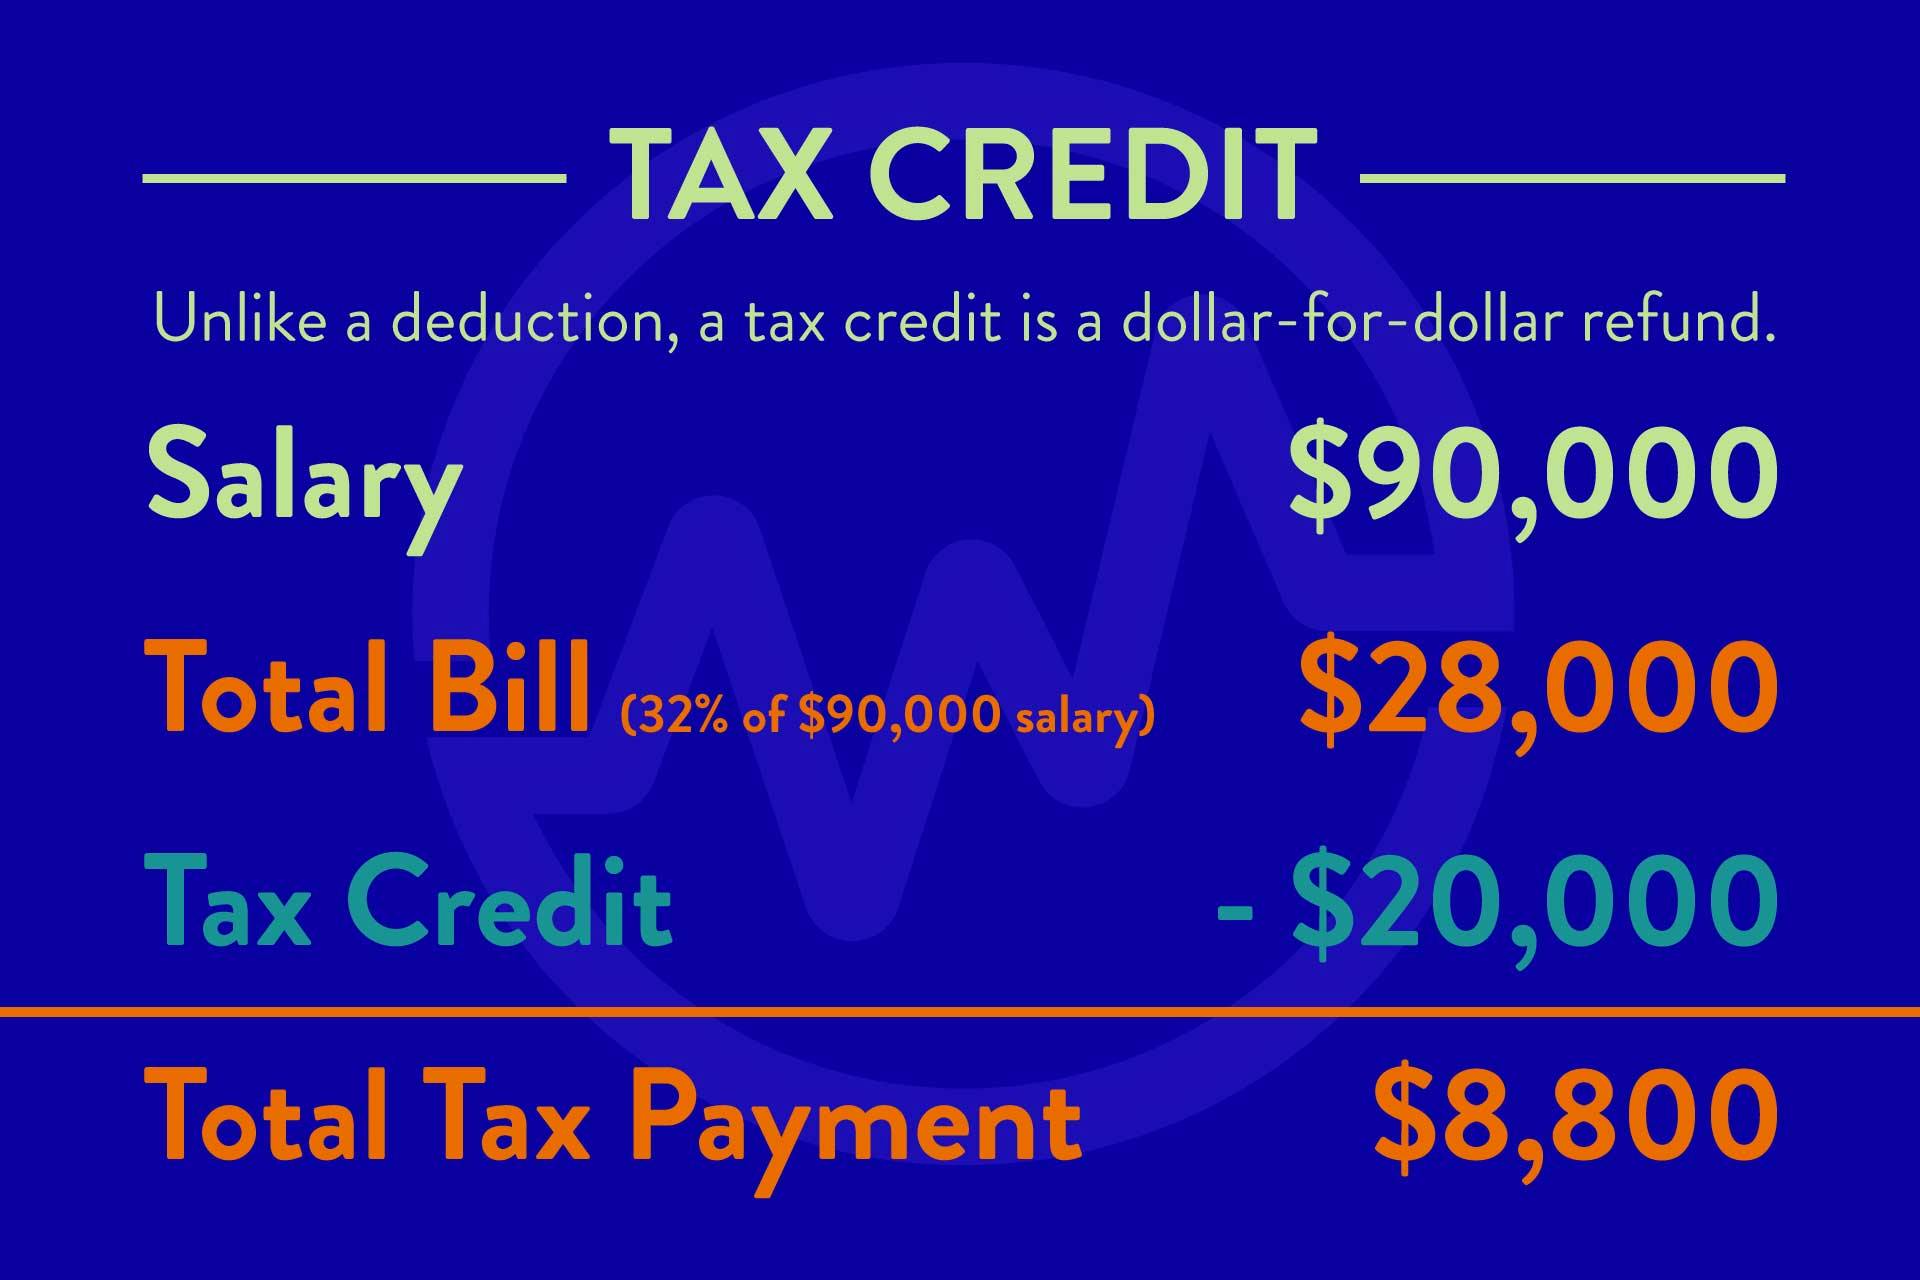 how-does-the-solar-tax-credit-work-how-to-claim-solar-tax-credit